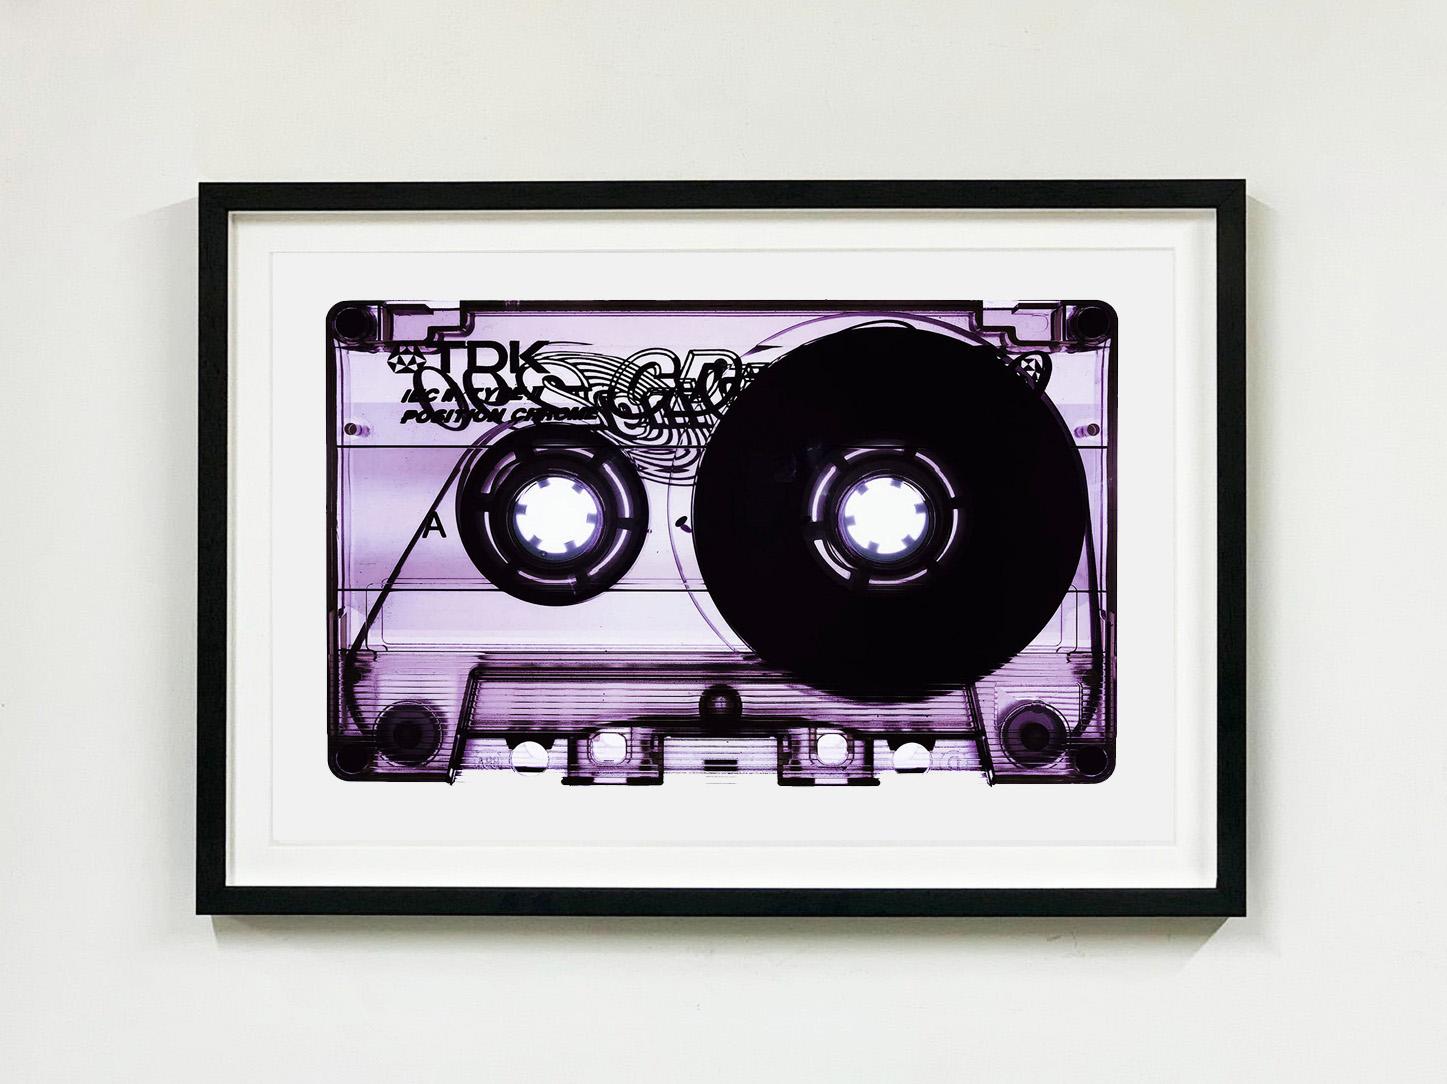 Tape Collection, Blank Tape Side A - Contemporary Pop Art Color Photography - Print by Heidler & Heeps